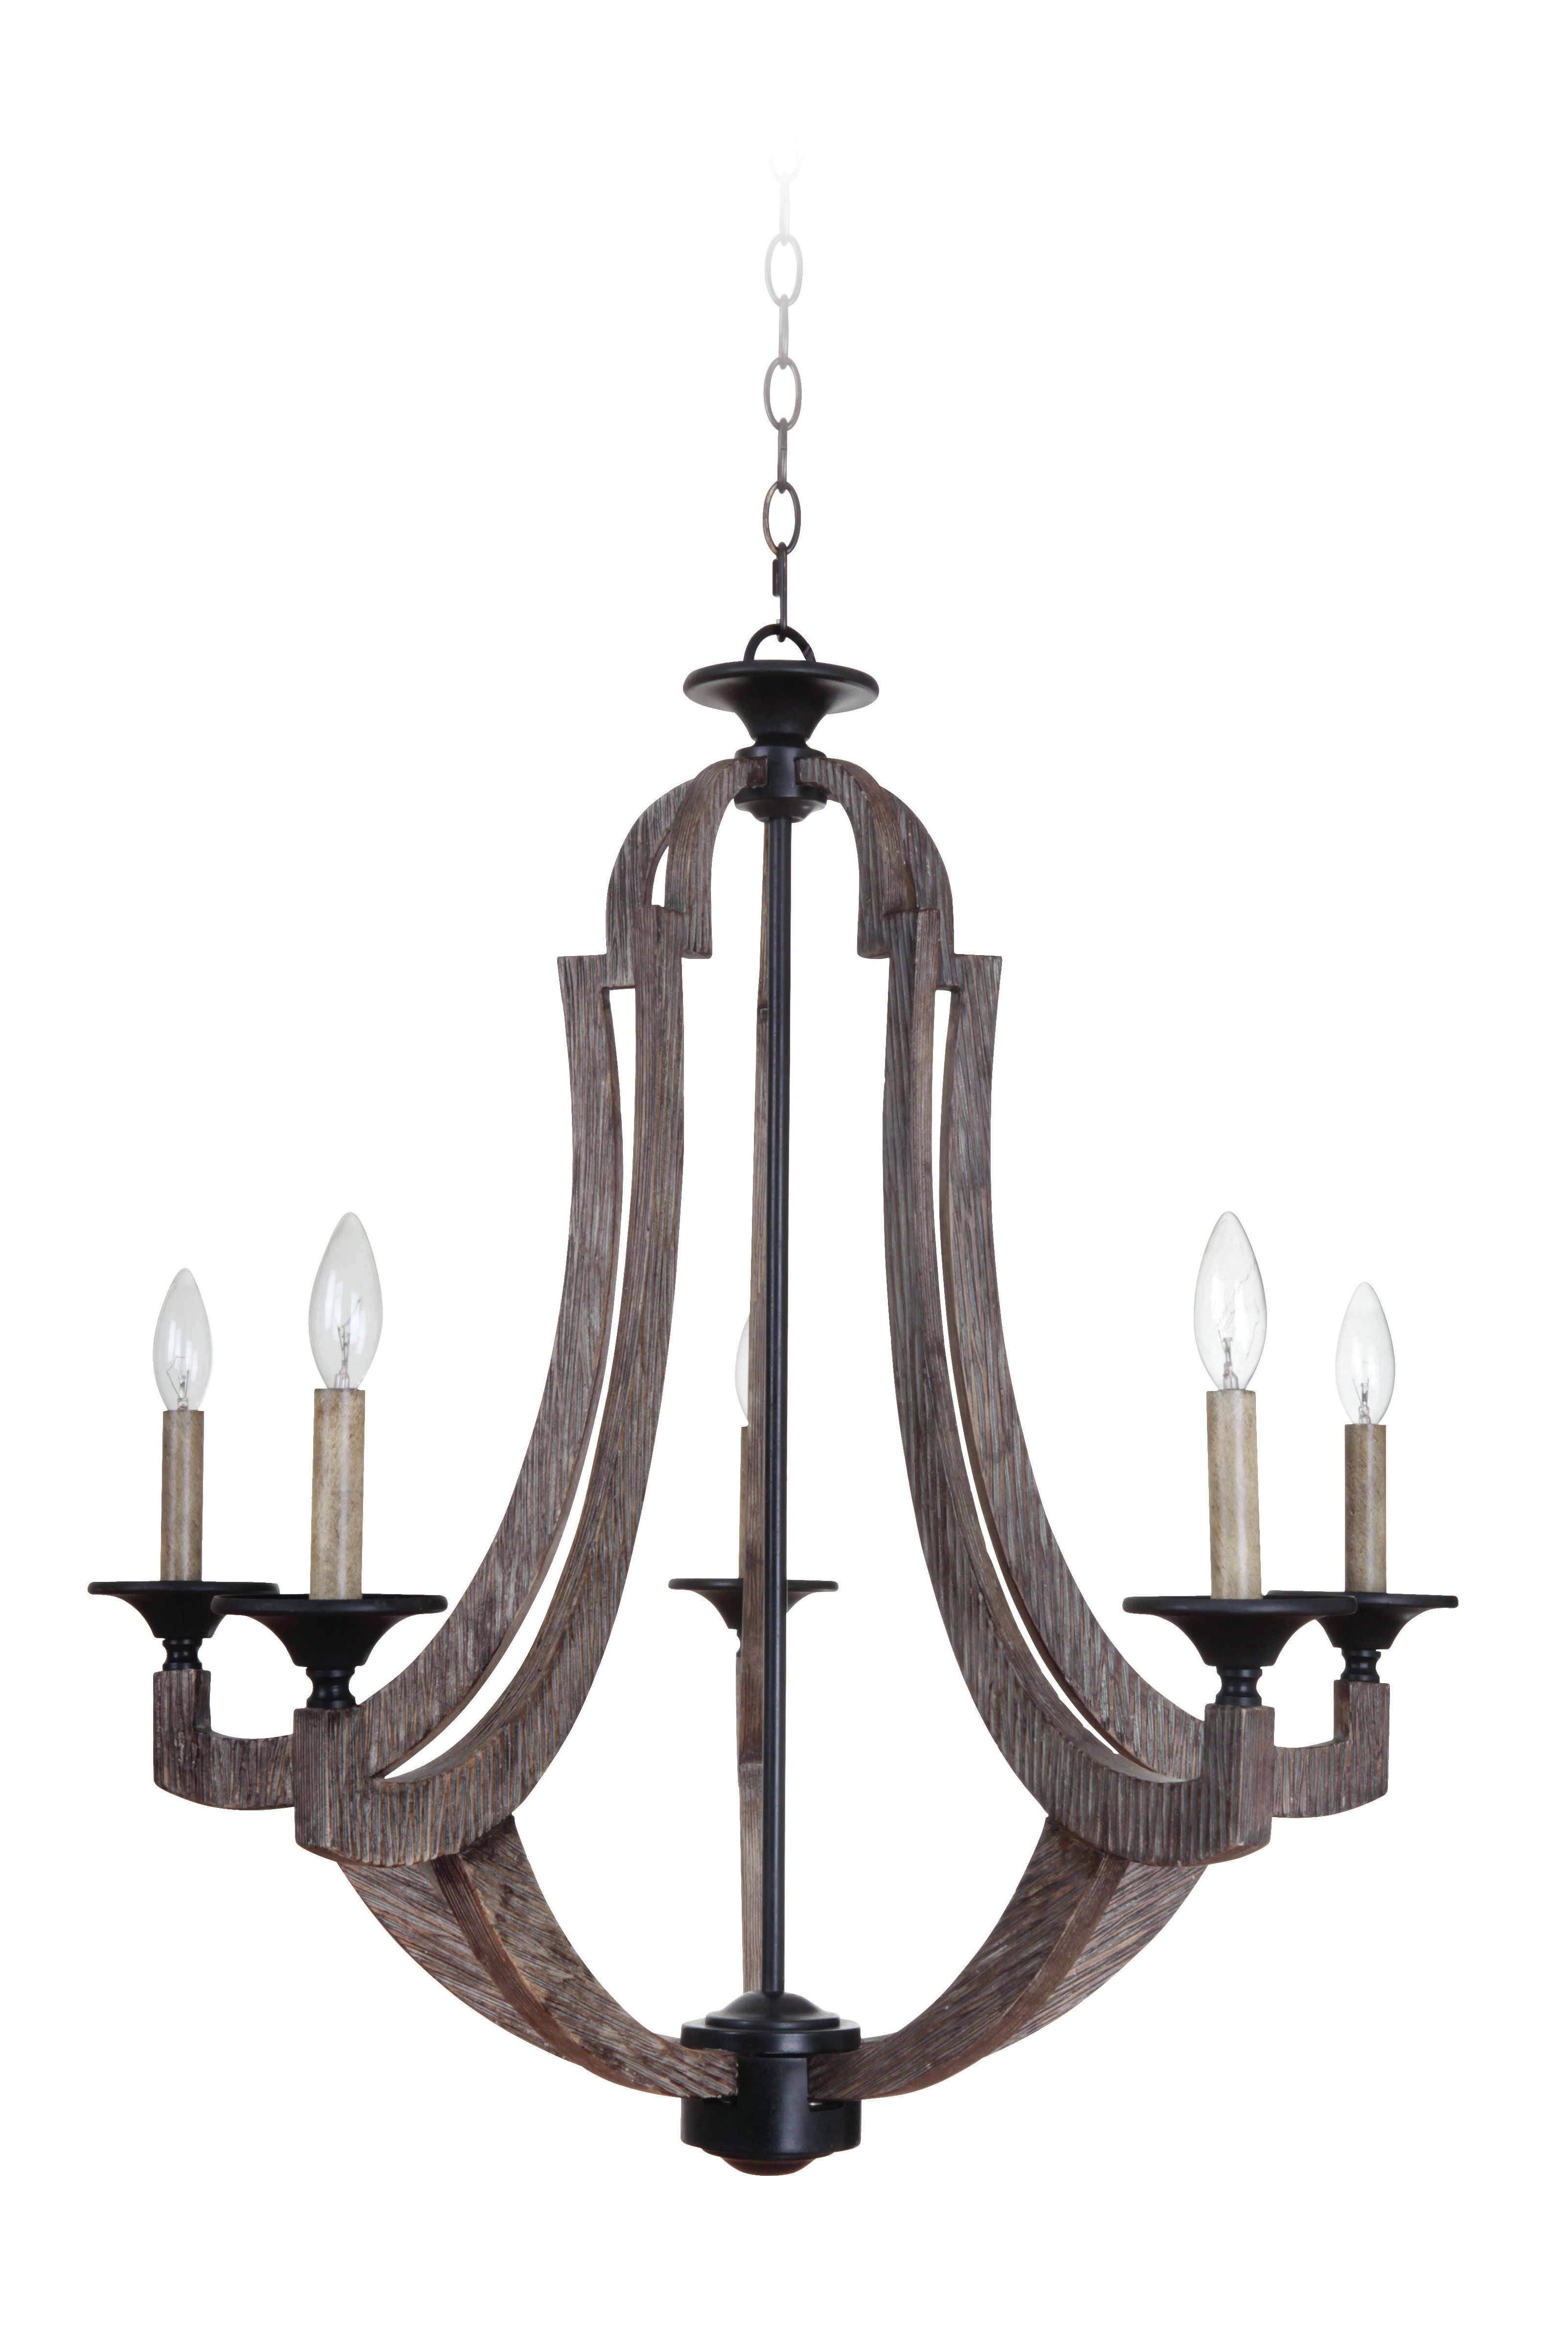 Marcoux 5 Light Empire Chandelier For Current Kenna 5 Light Empire Chandeliers (View 5 of 25)